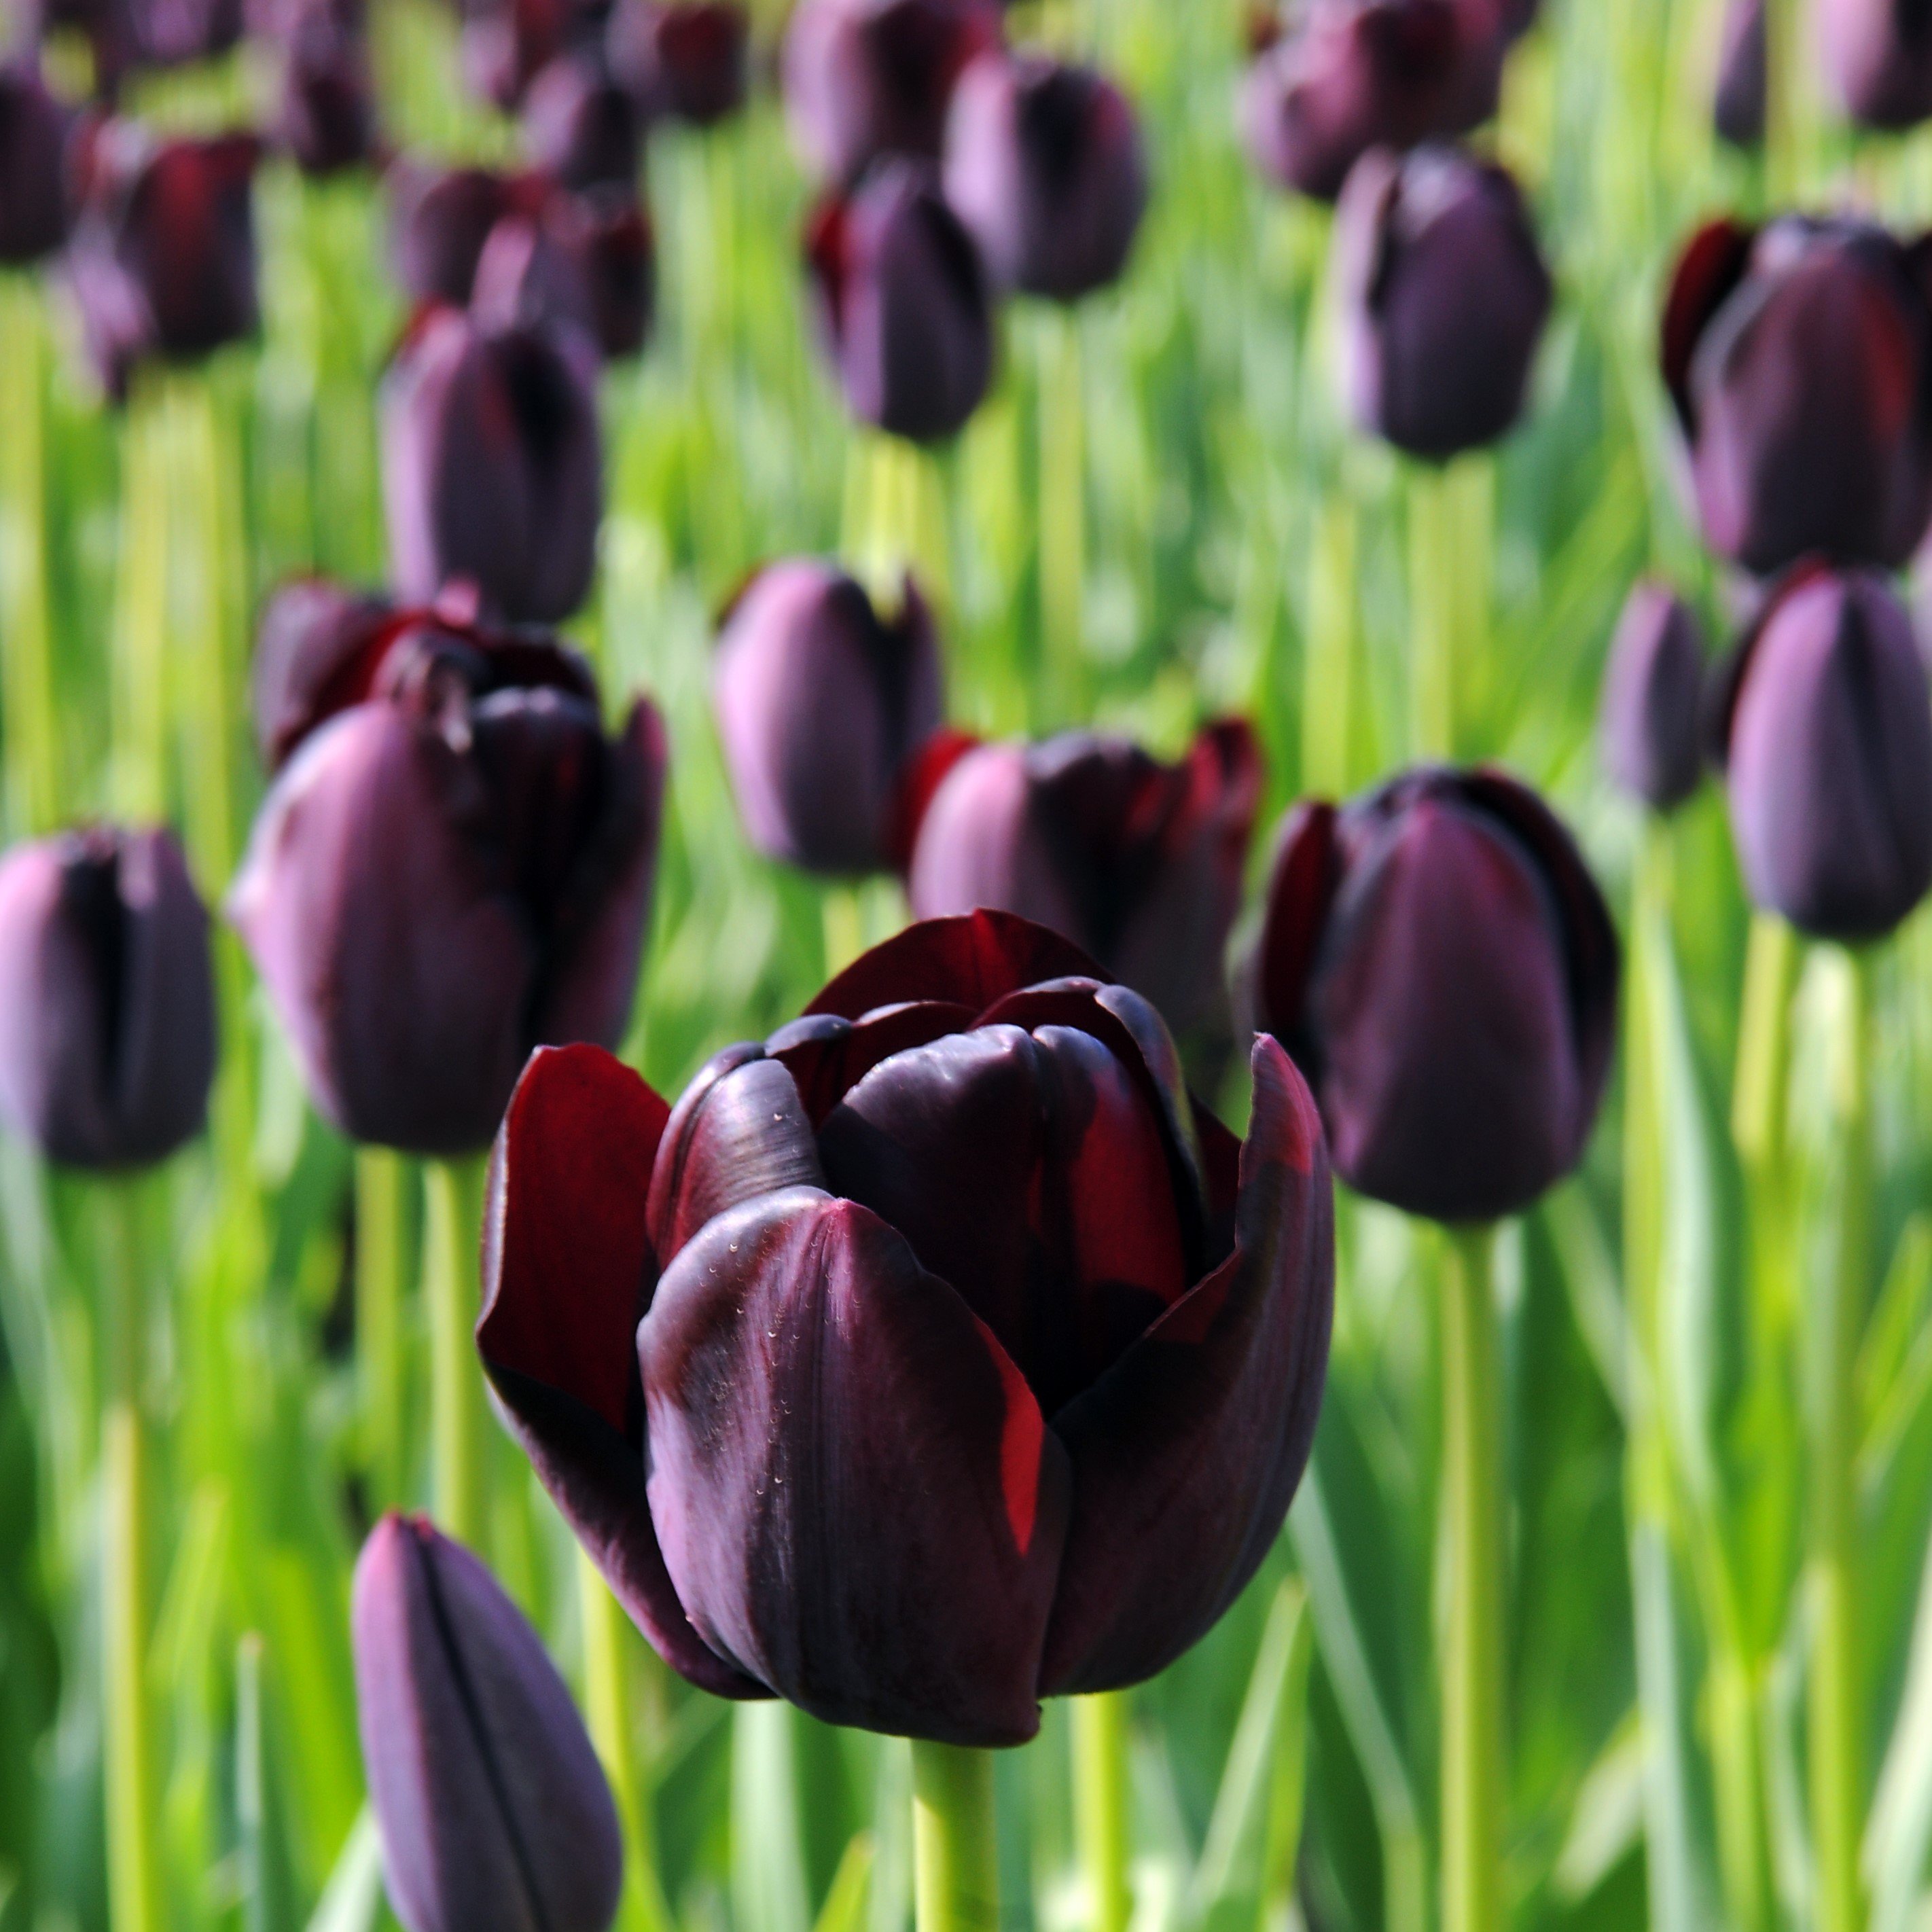 Tulip Flower Bulbs Single Form, Queen of the Night from Easy to Grow Bulbs - image 2 of 2